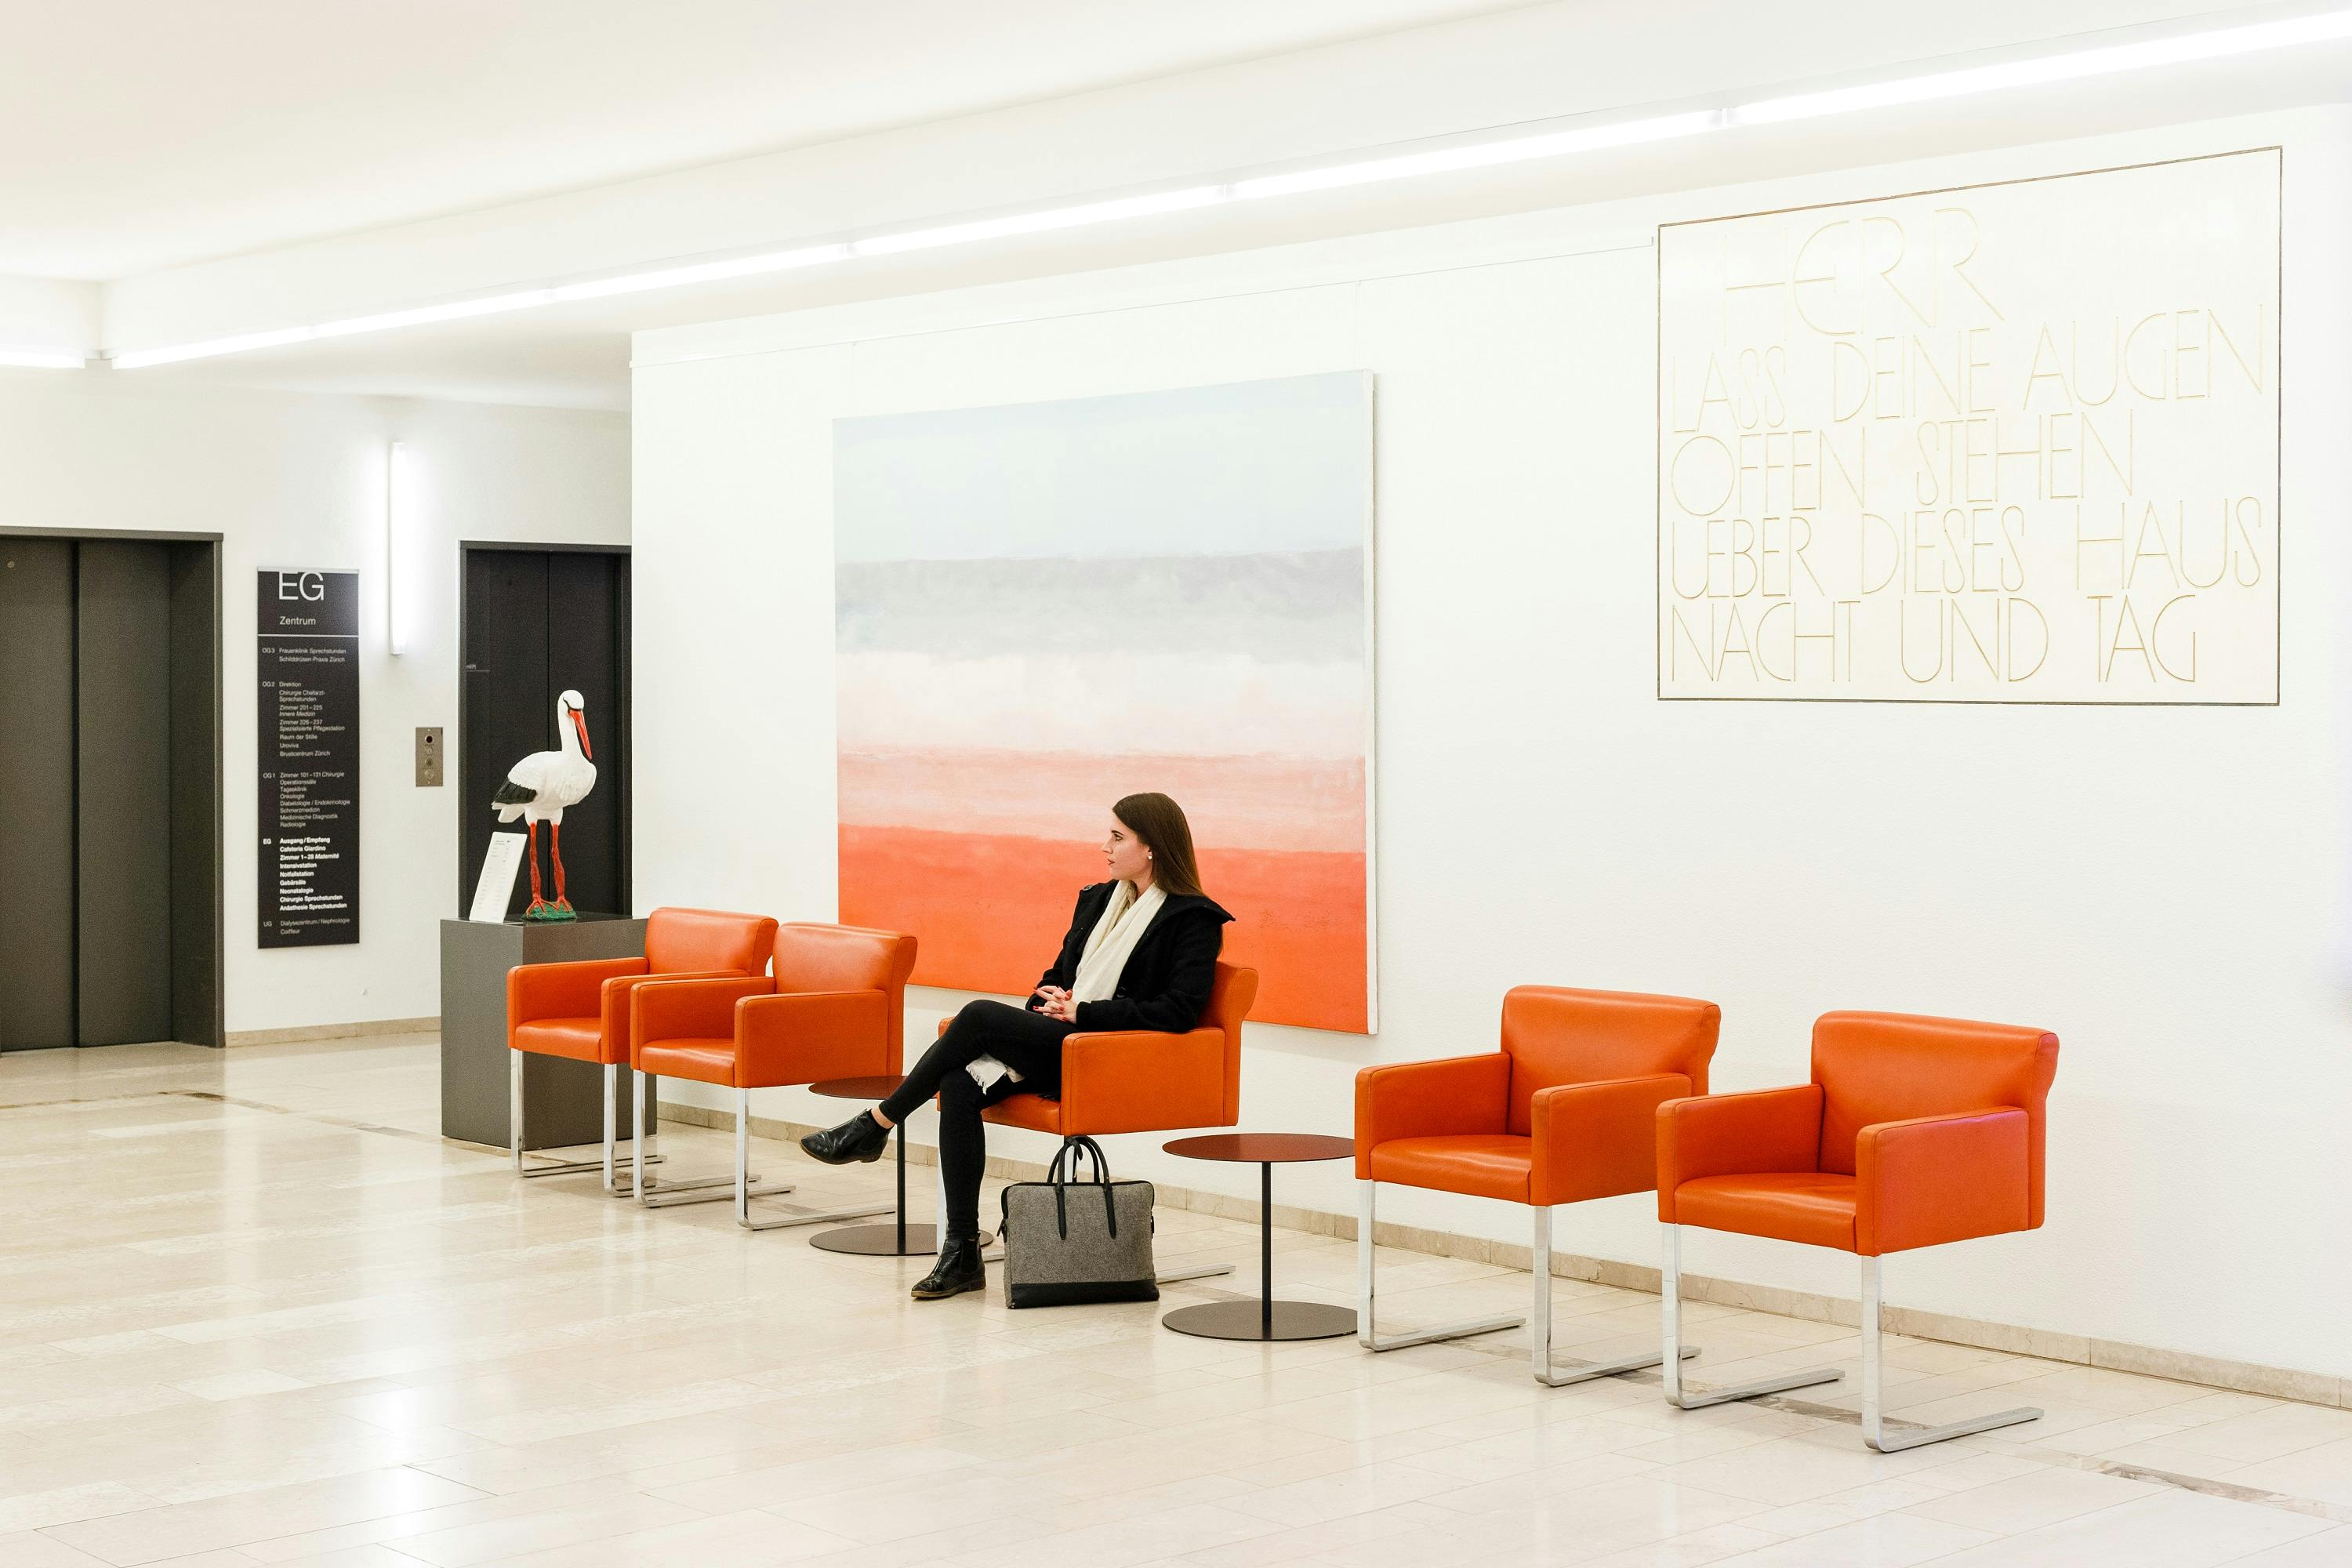 Woman sitting in modern gallery with paintings and sculpture.